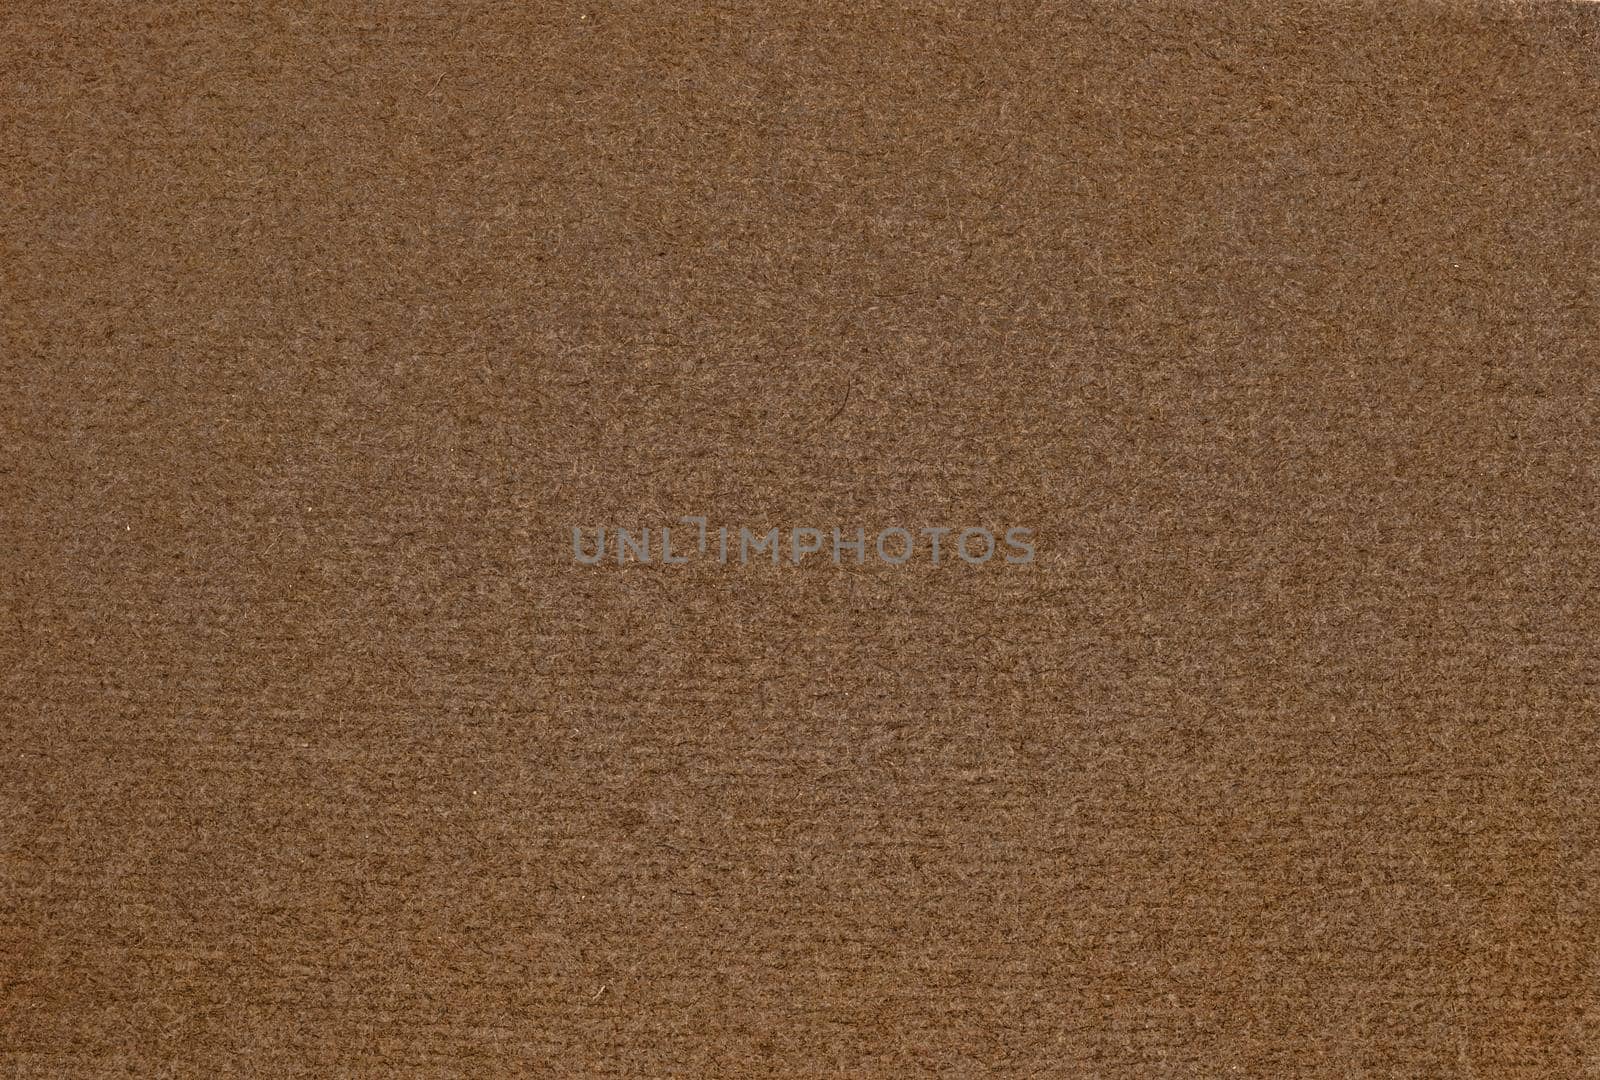 A dense industrial sheet of grey paper with a textured surface